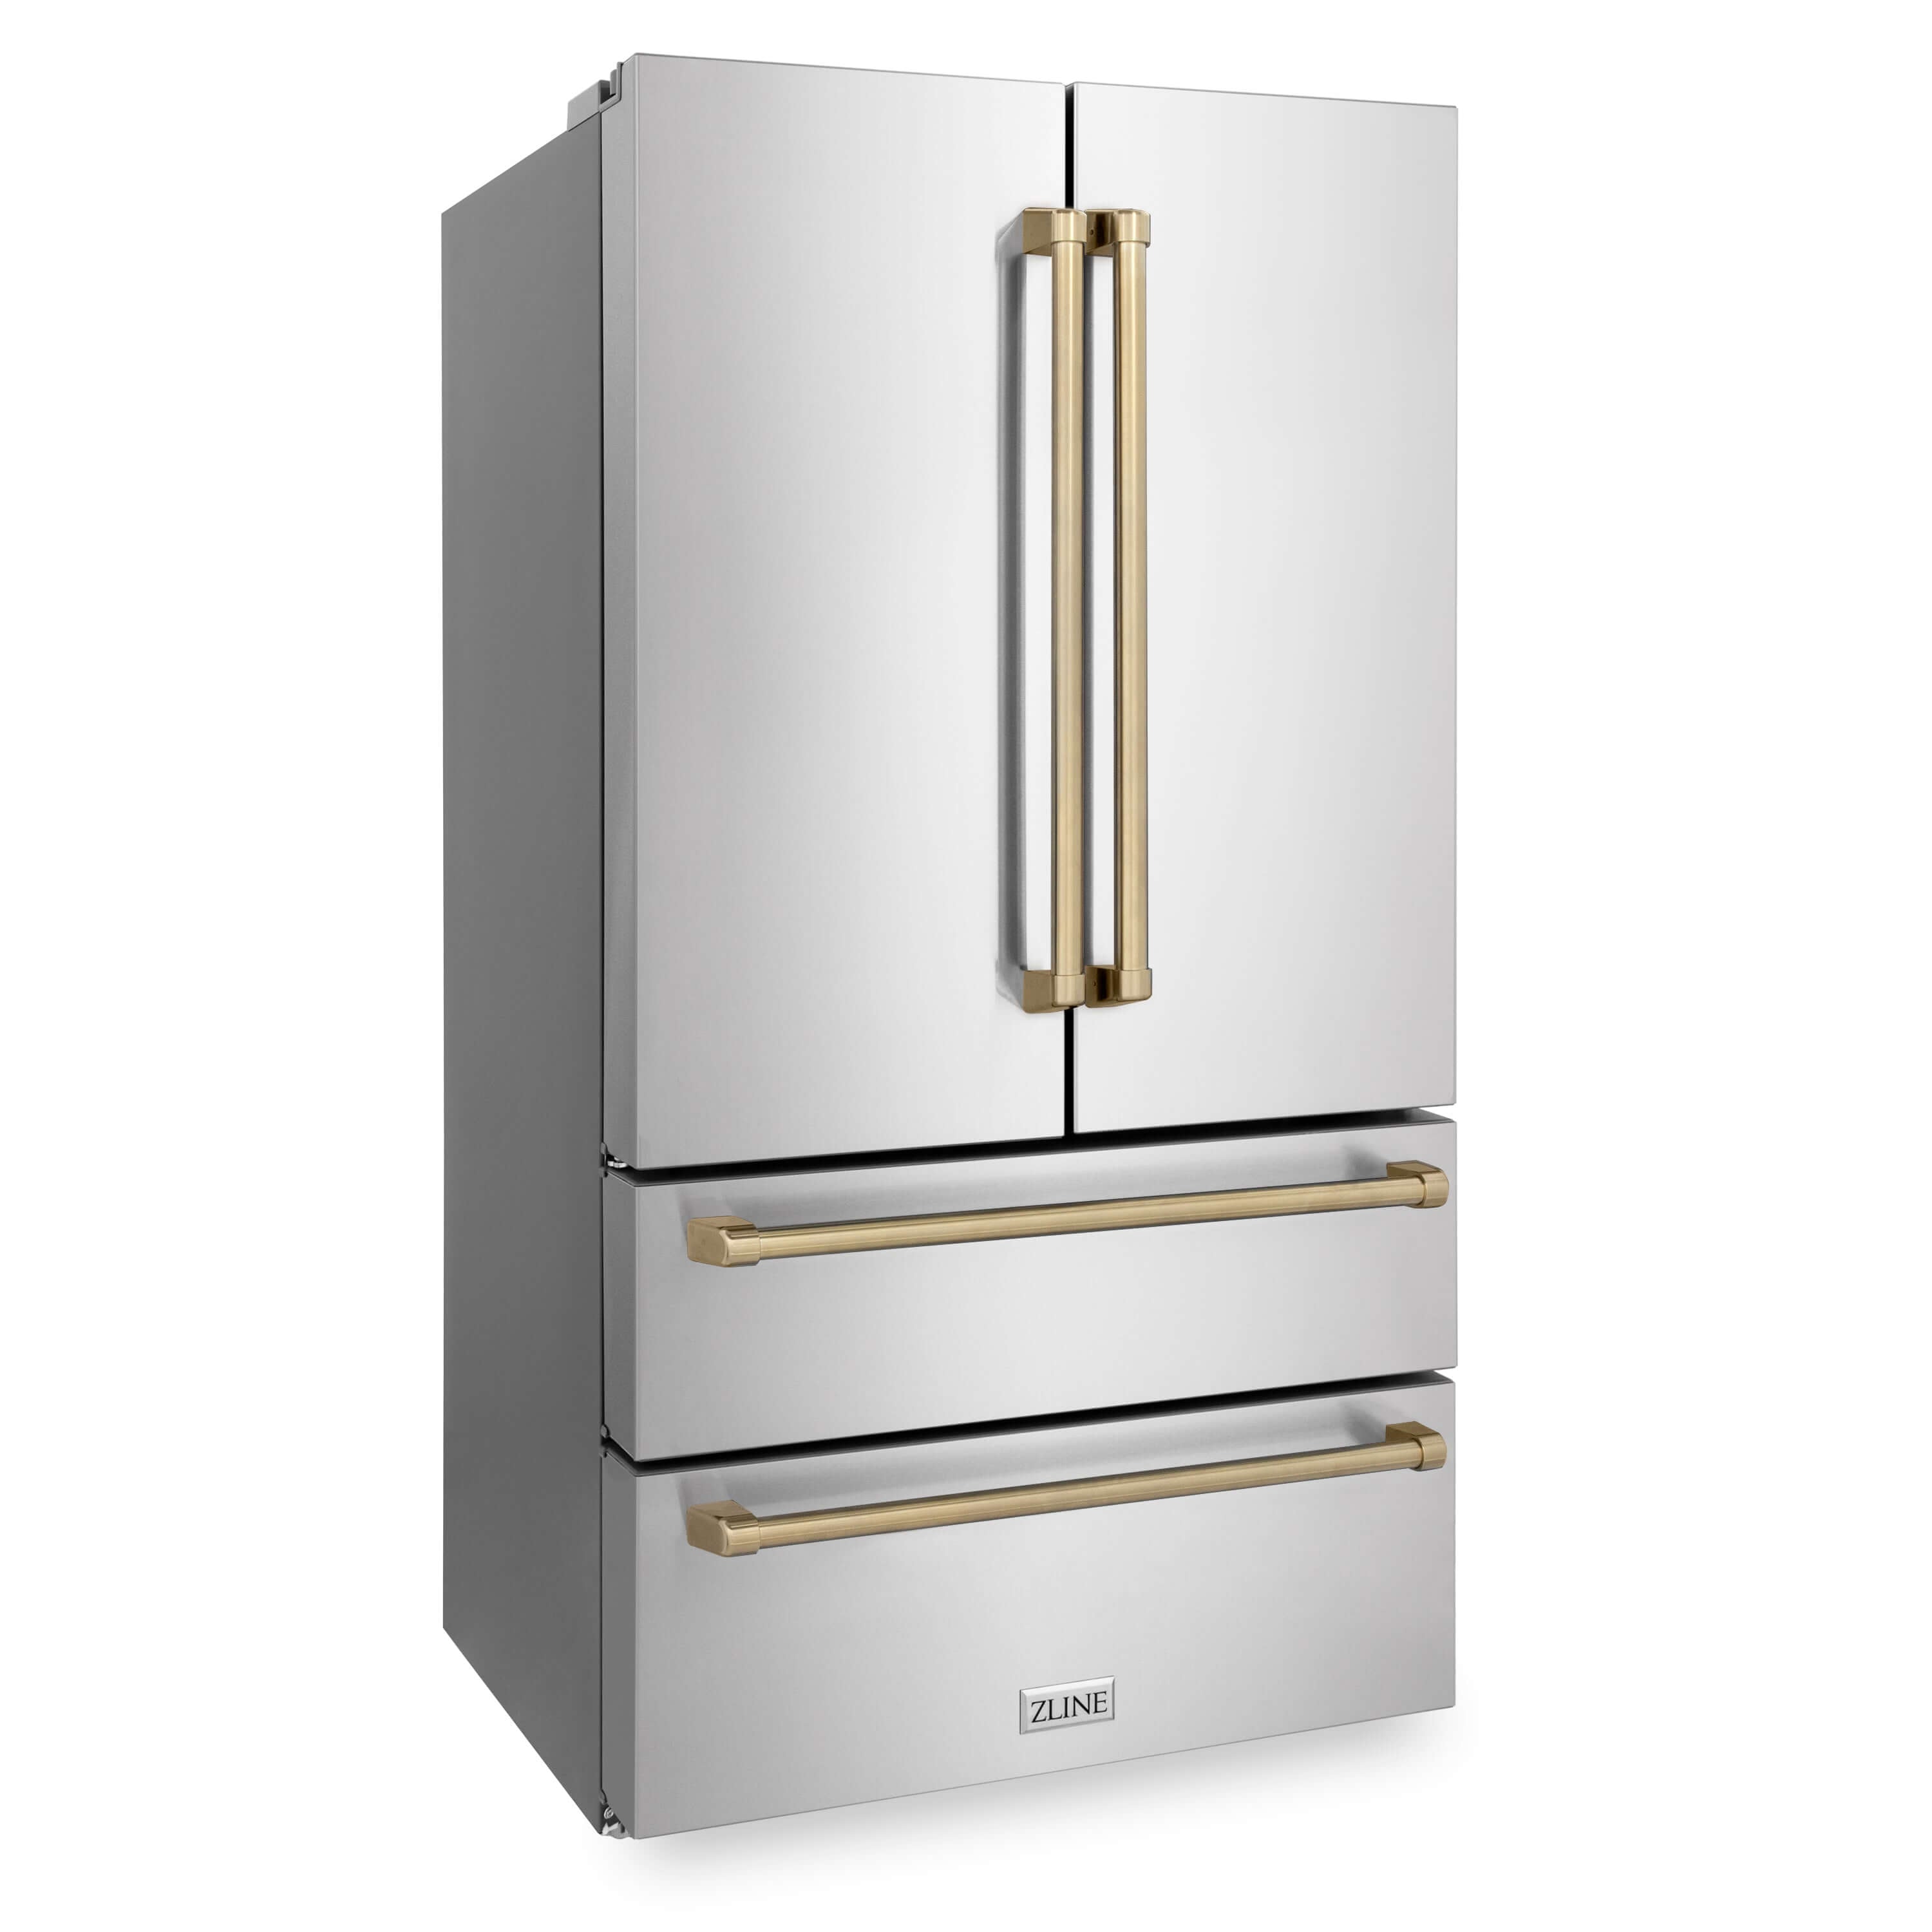 ZLINE 36 in. Autograph Edition French Door Refrigerator in Stainless Steel with Champagne Bronze Accents side.